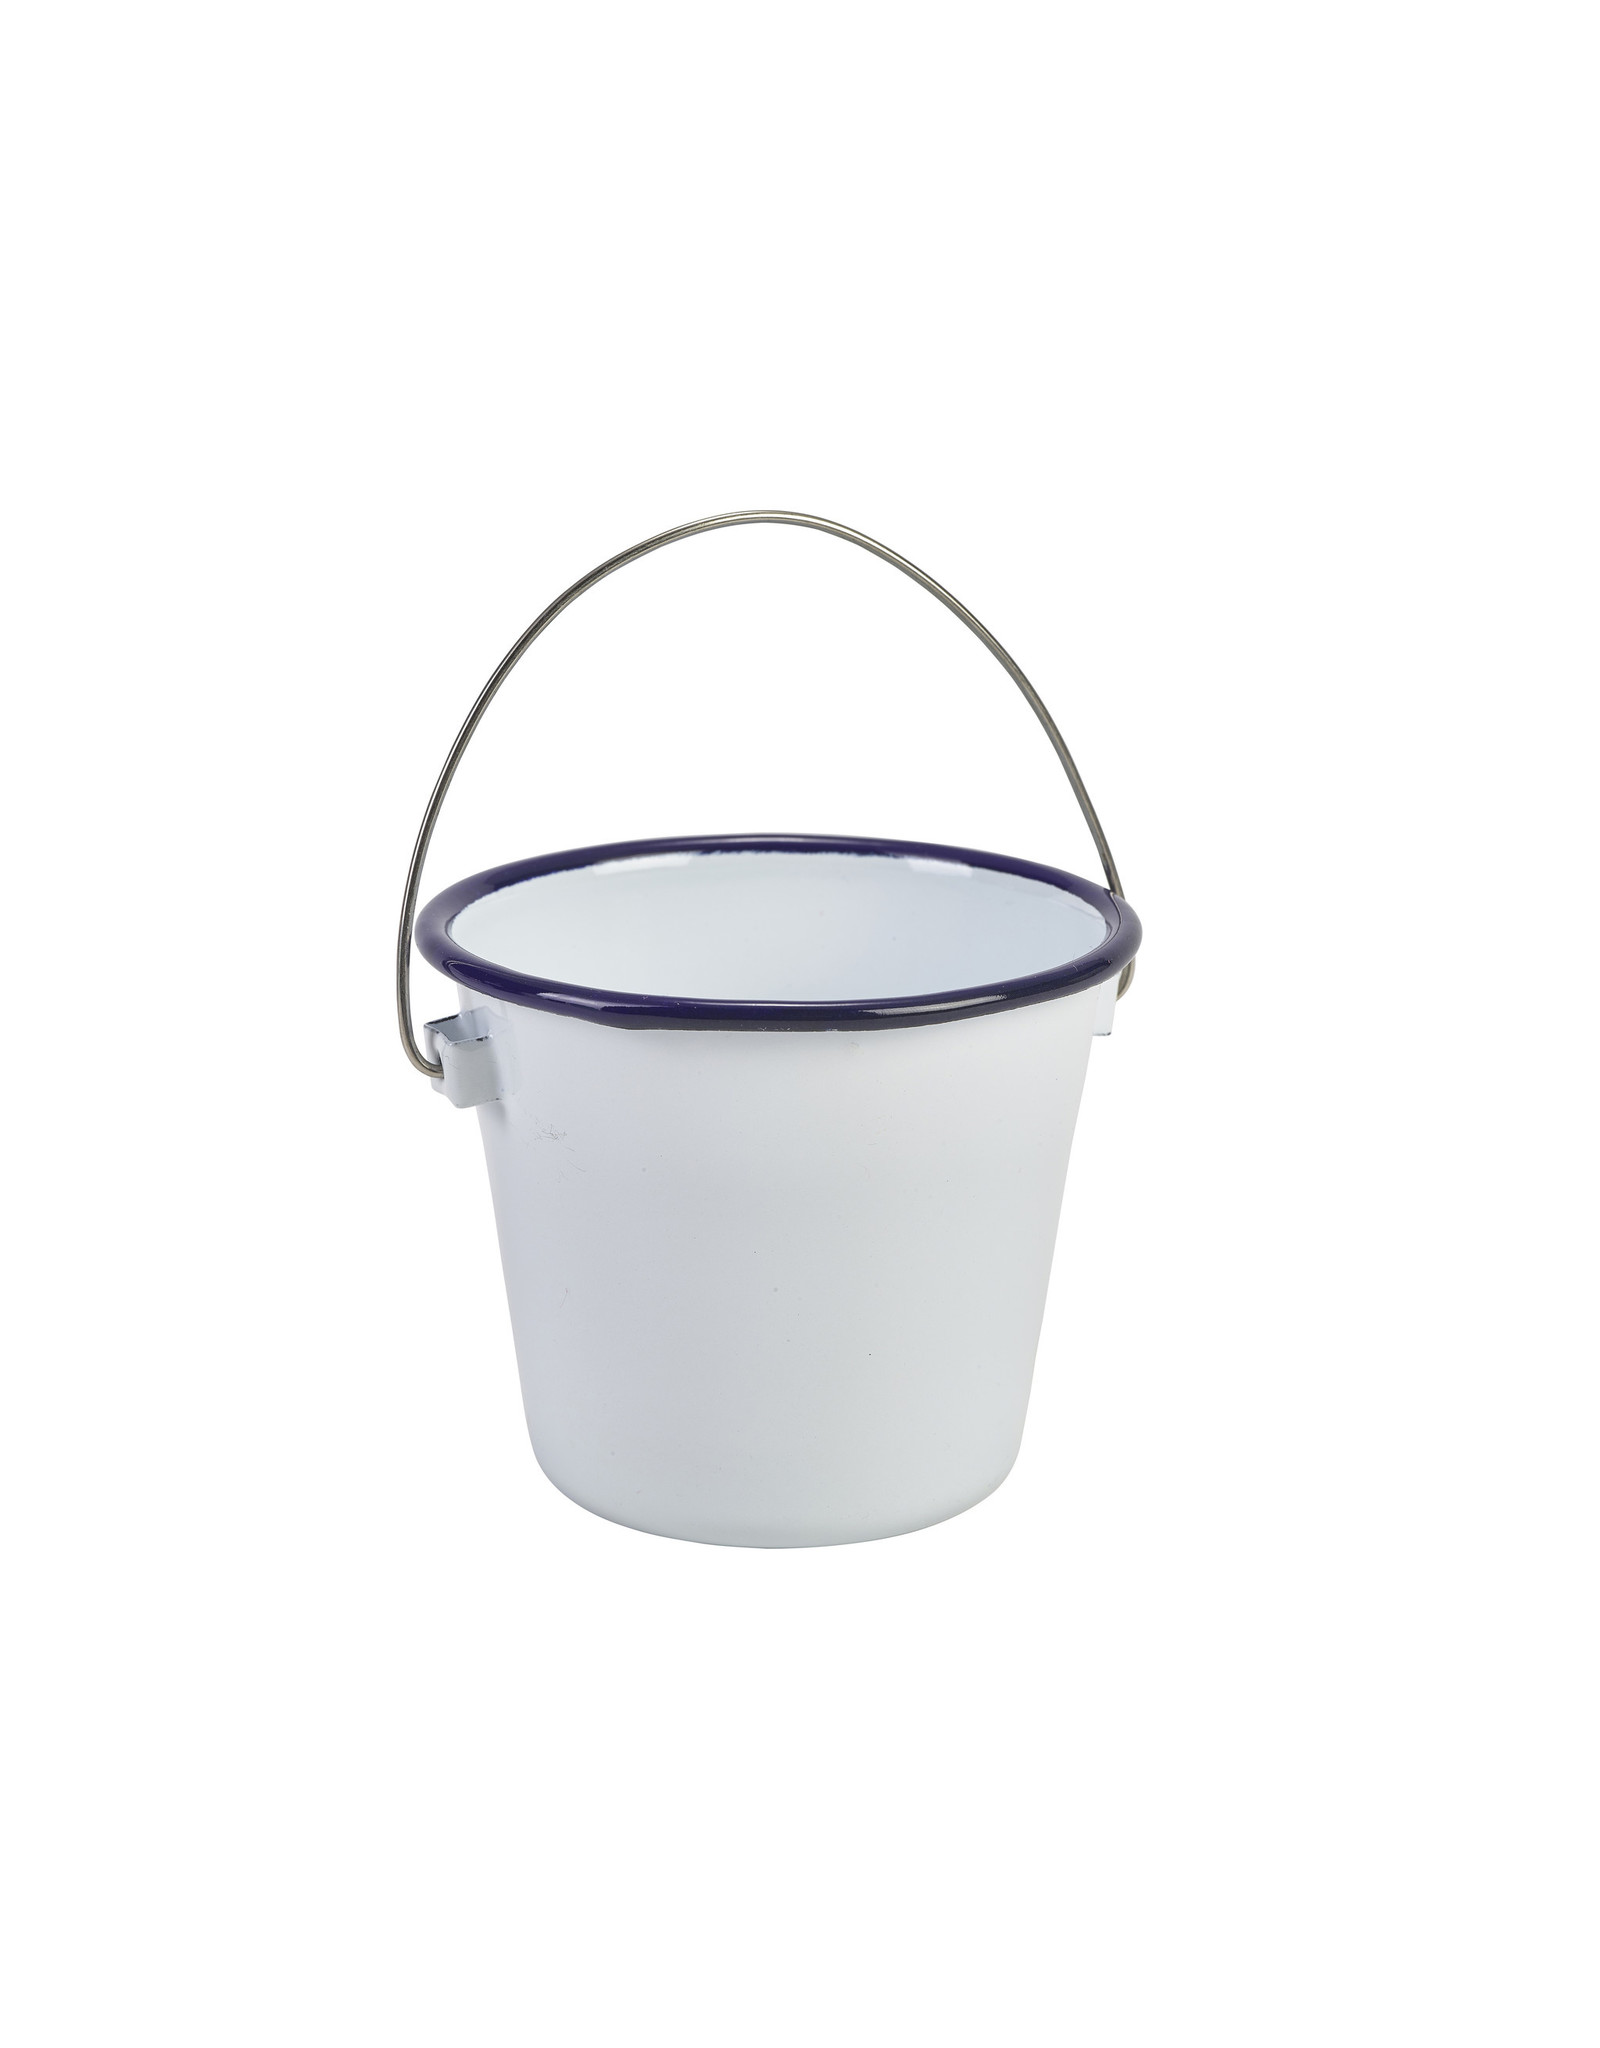 Stylepoint Emaille buffetemmer m/blauwe rand 10 cm